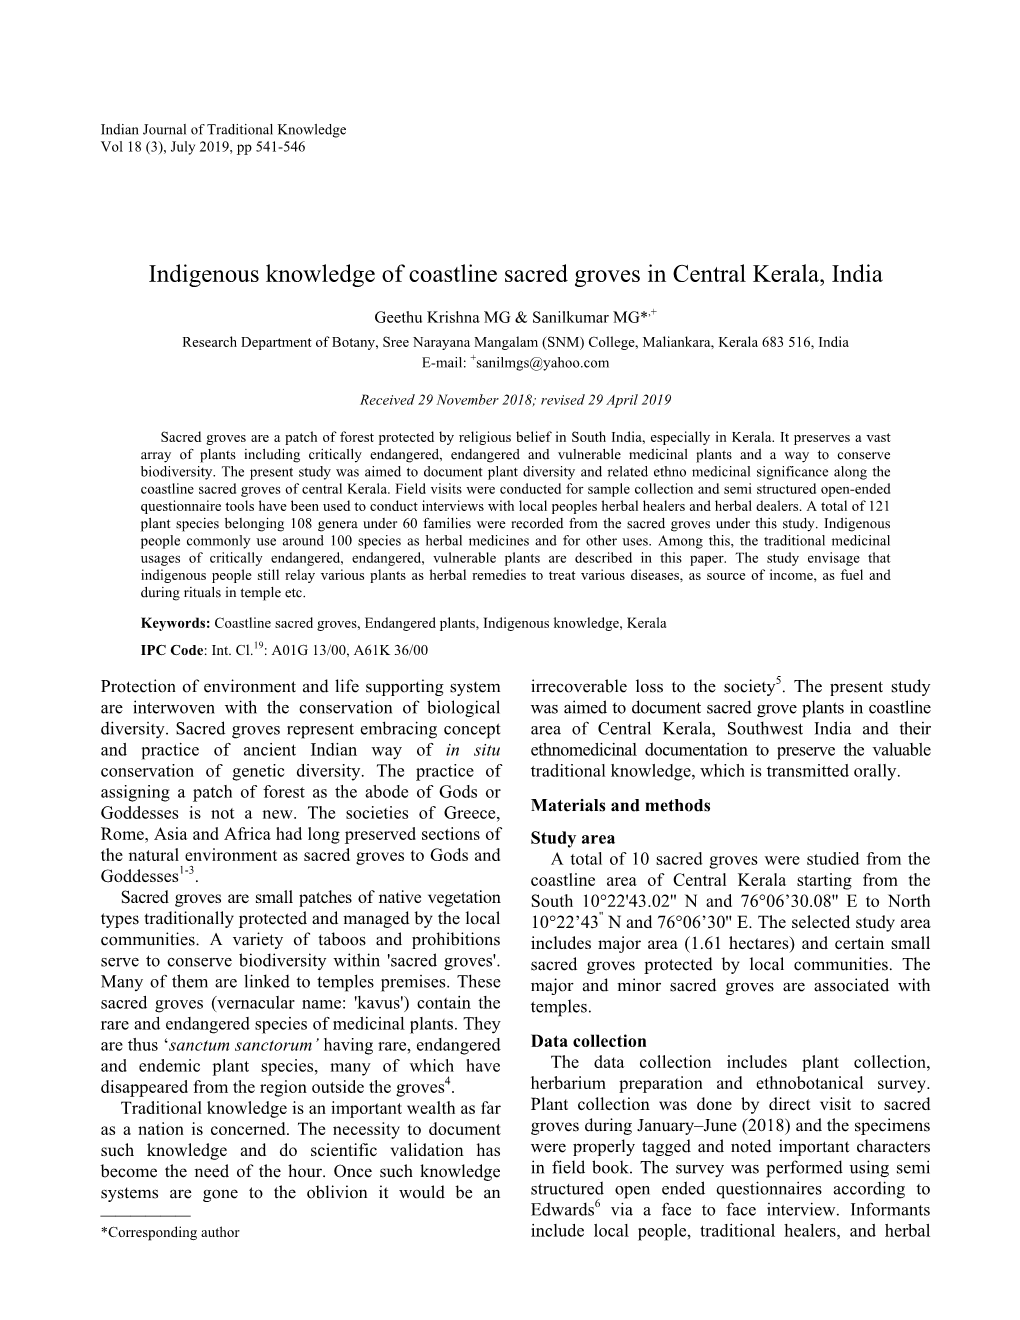 Indigenous Knowledge of Coastline Sacred Groves in Central Kerala, India